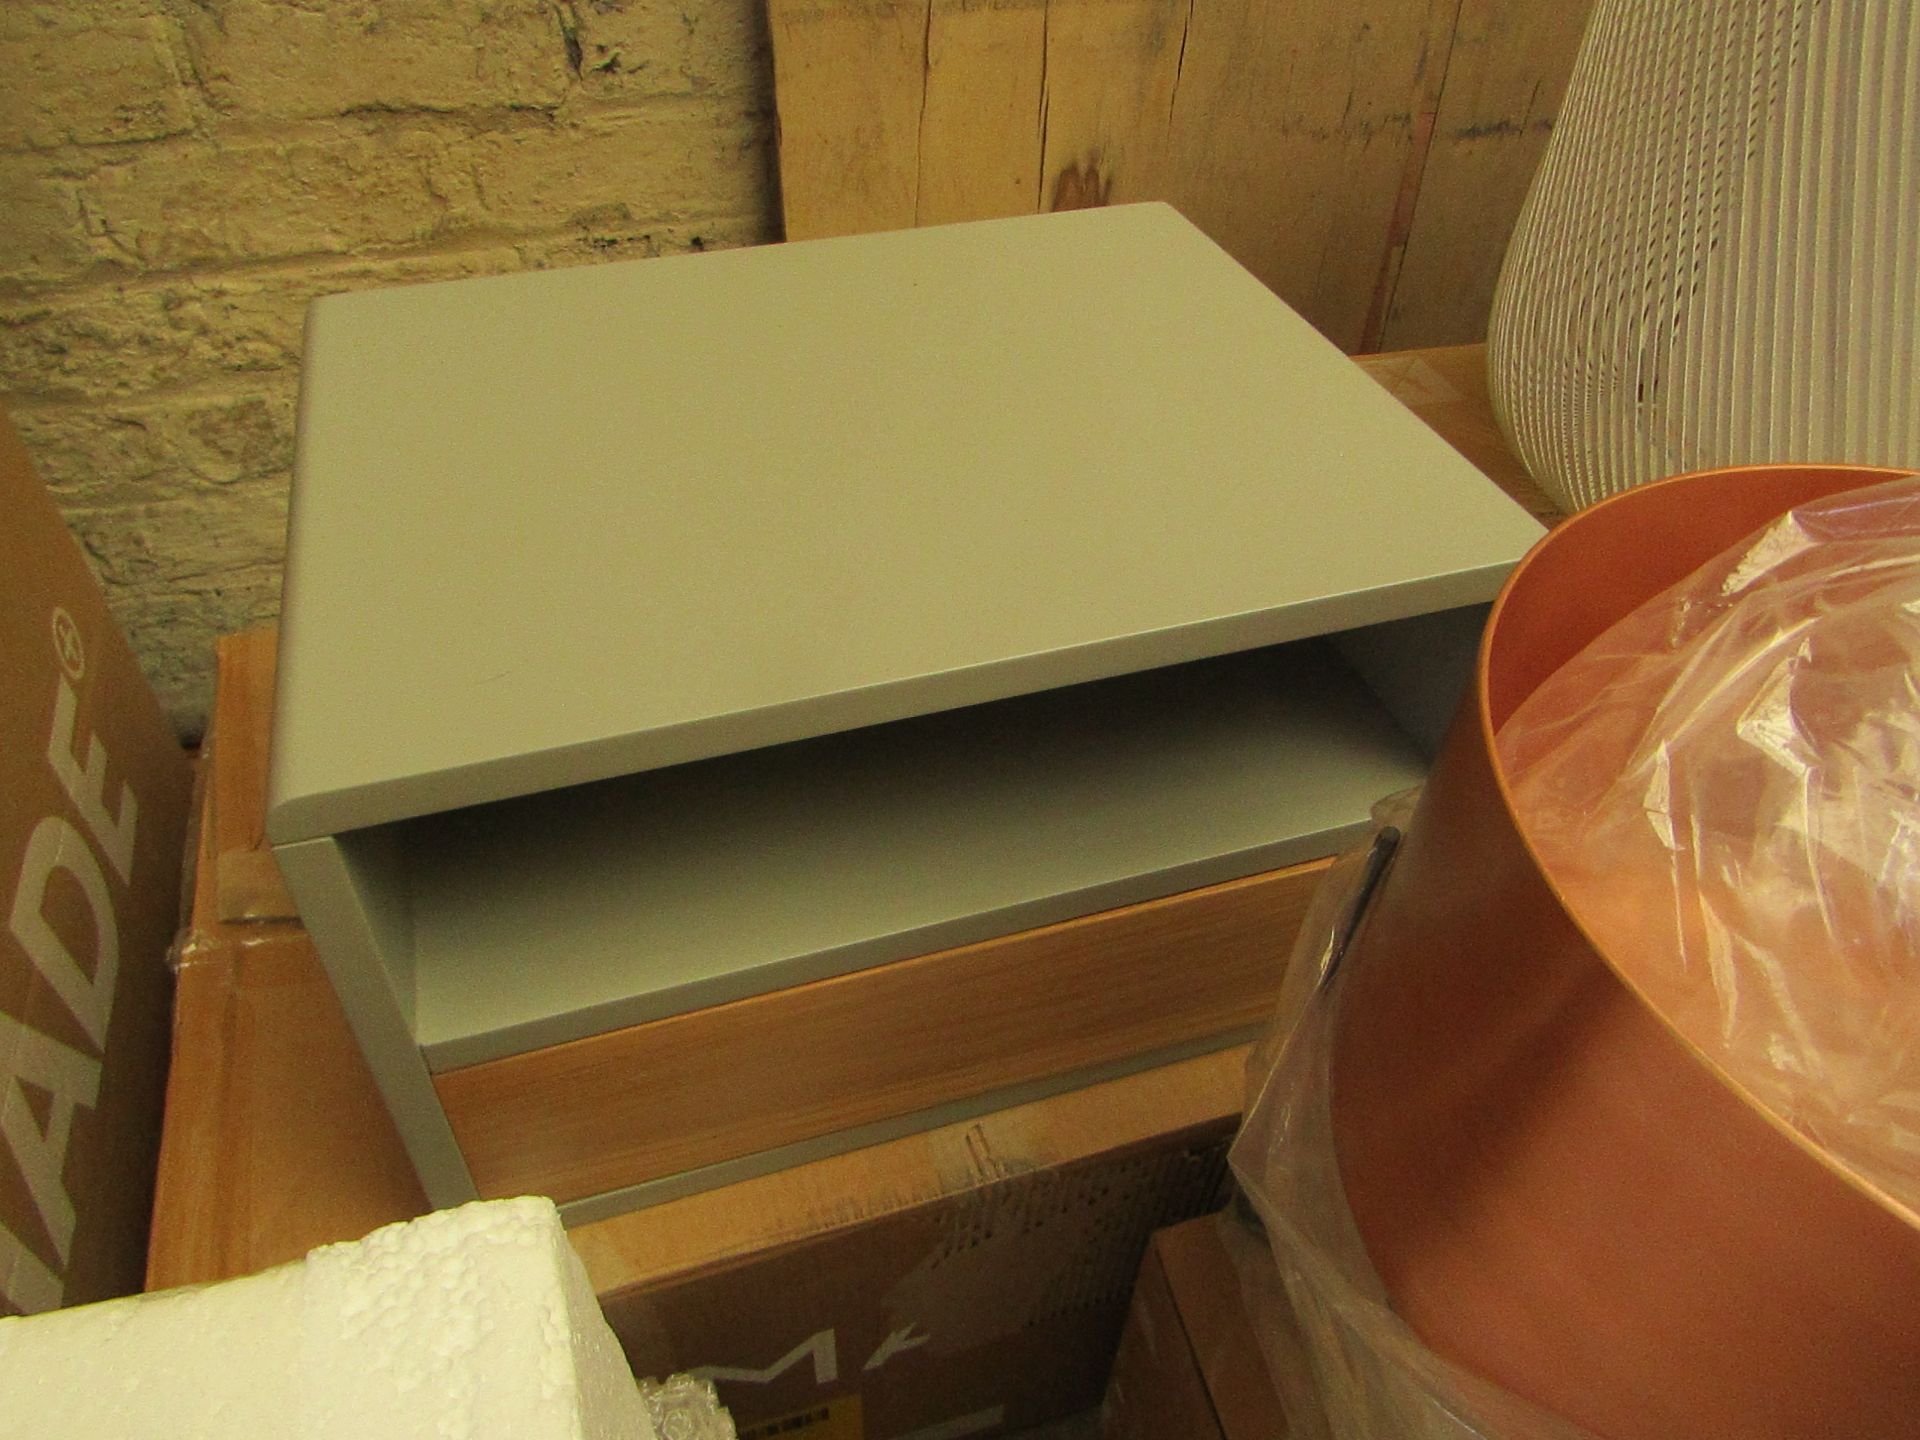 1 x Made.com Ukan Bedside Table Grey and Oak RRP £129 SKU MAD-STBUKA002GRY-UK TOTAL RRP £129 This